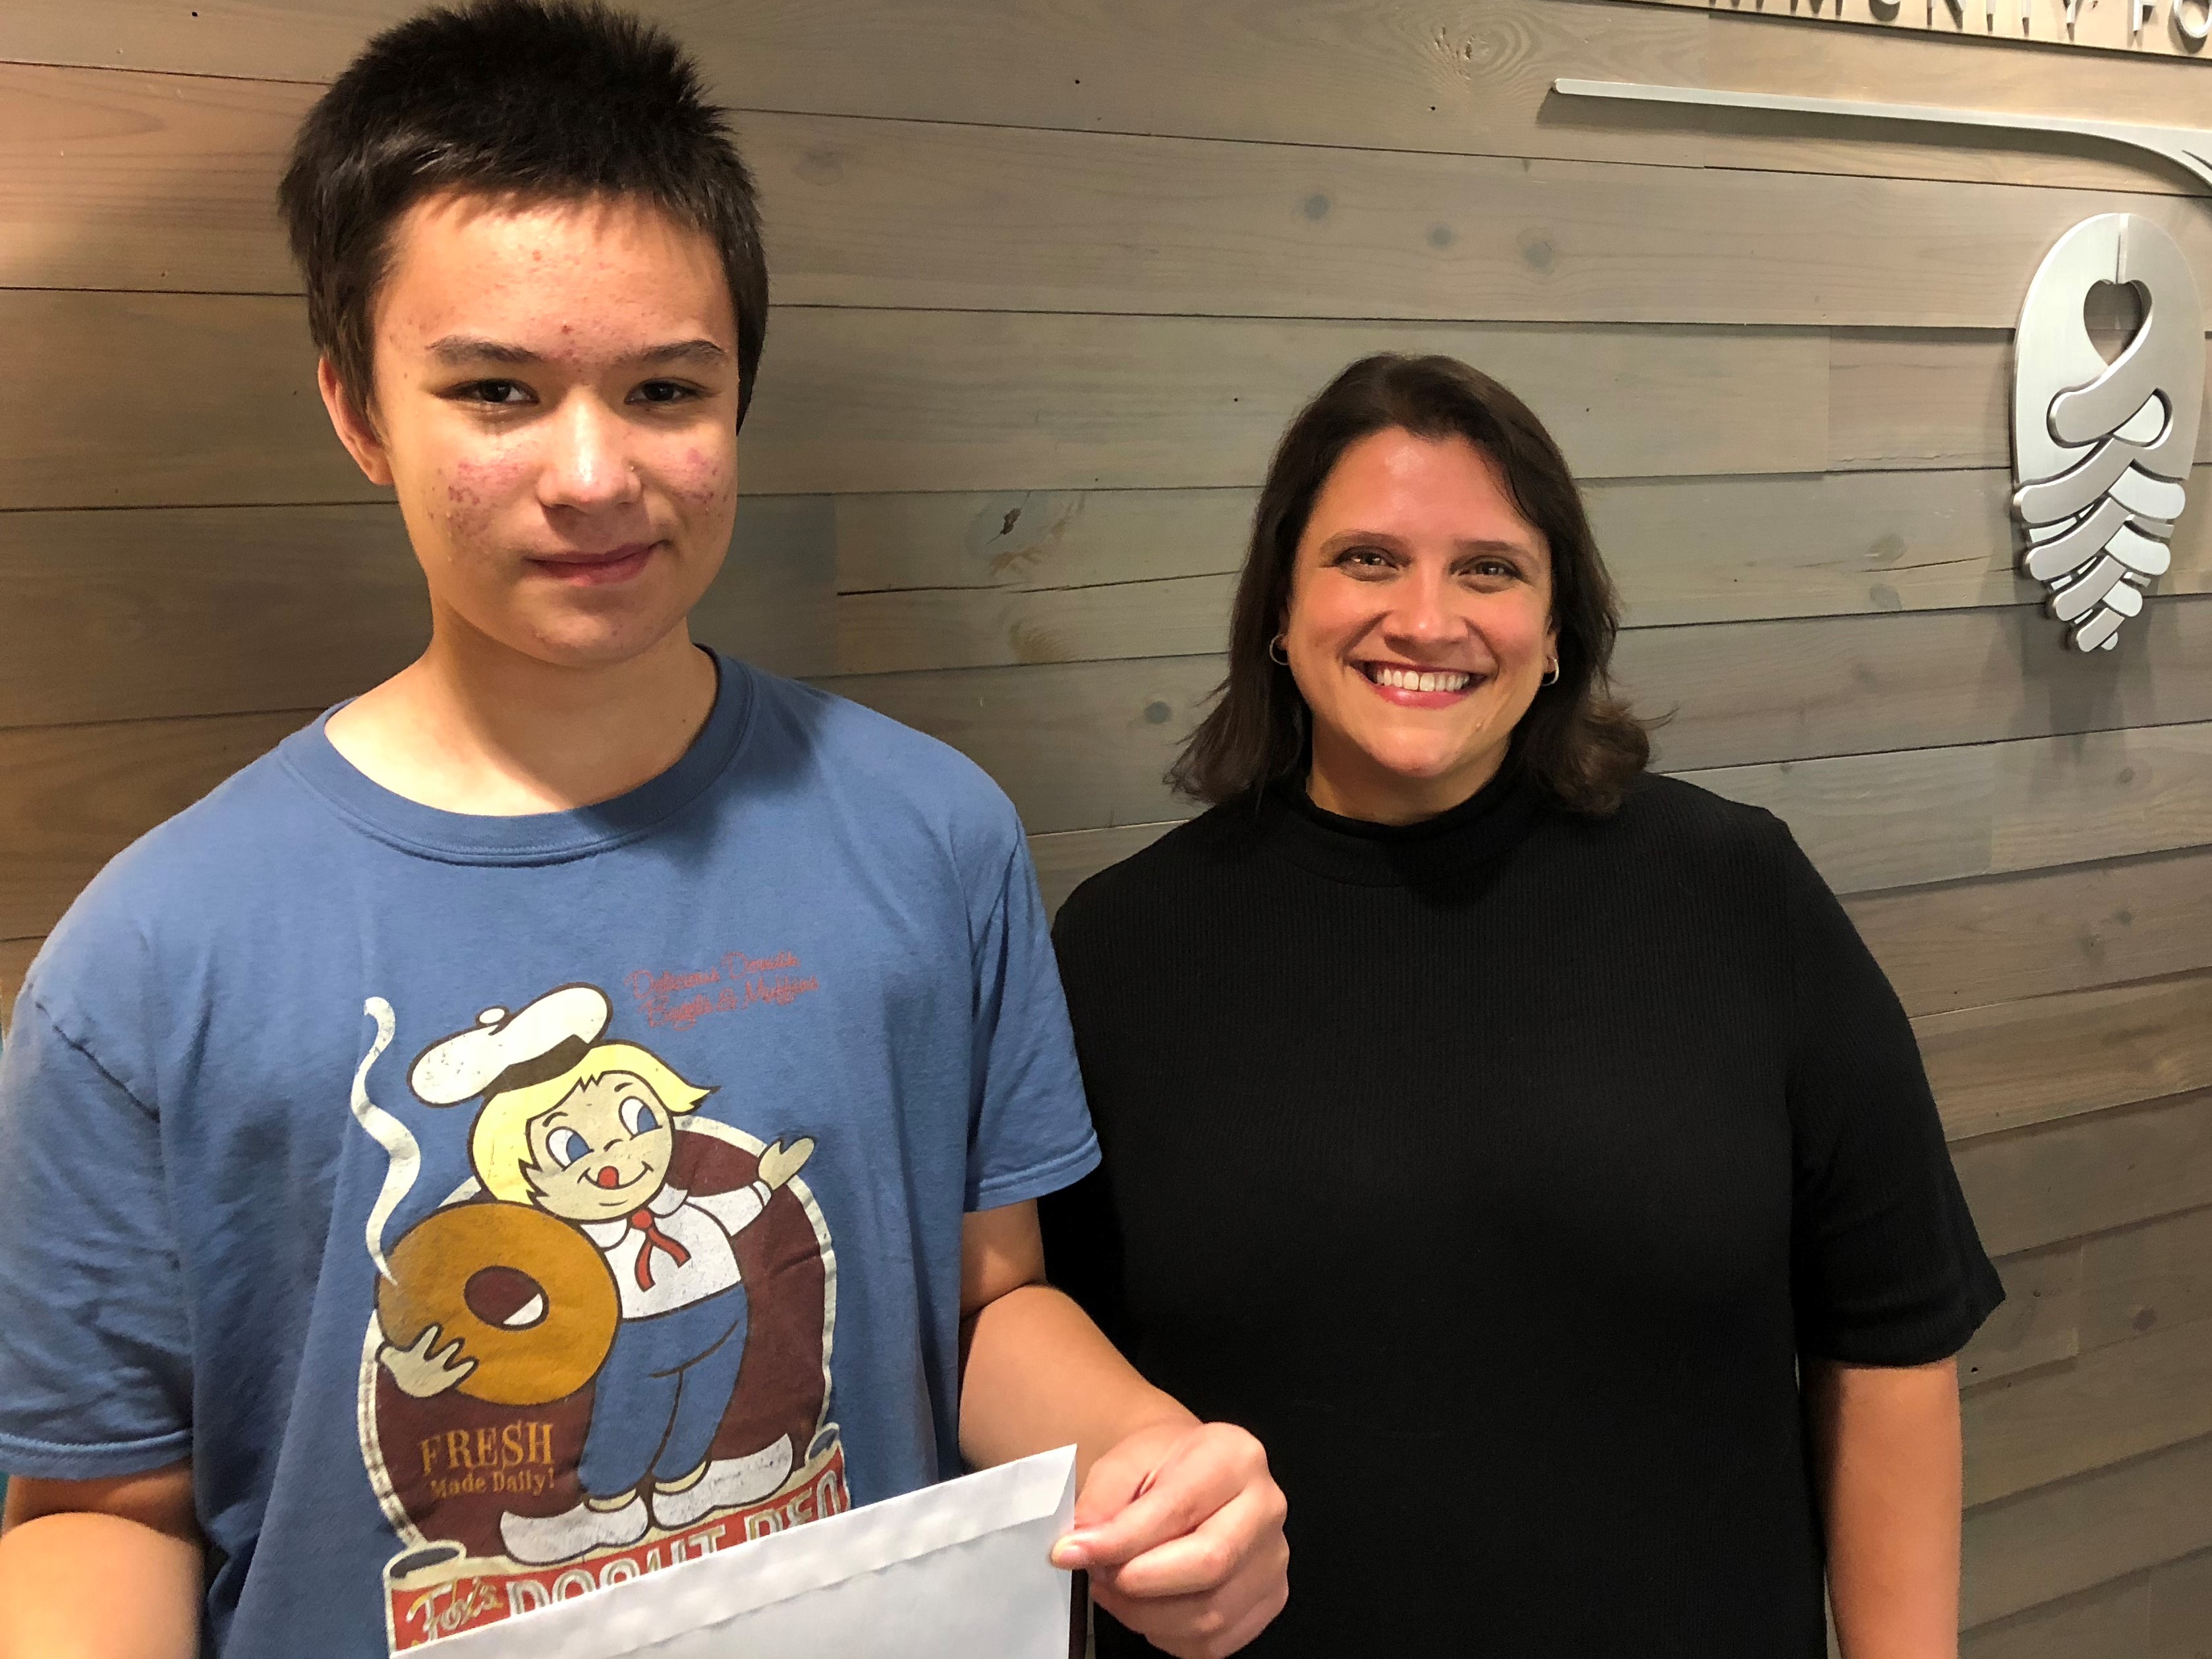 Philip Wong, who attends Exploris Middle School in Raleigh, saved up his allowance and personally delivered his donation to NCCF’s Disaster Relief Fund. Leslie Ann Jackson, director of grants and scholarships, was happy to accept this gift from the heart.